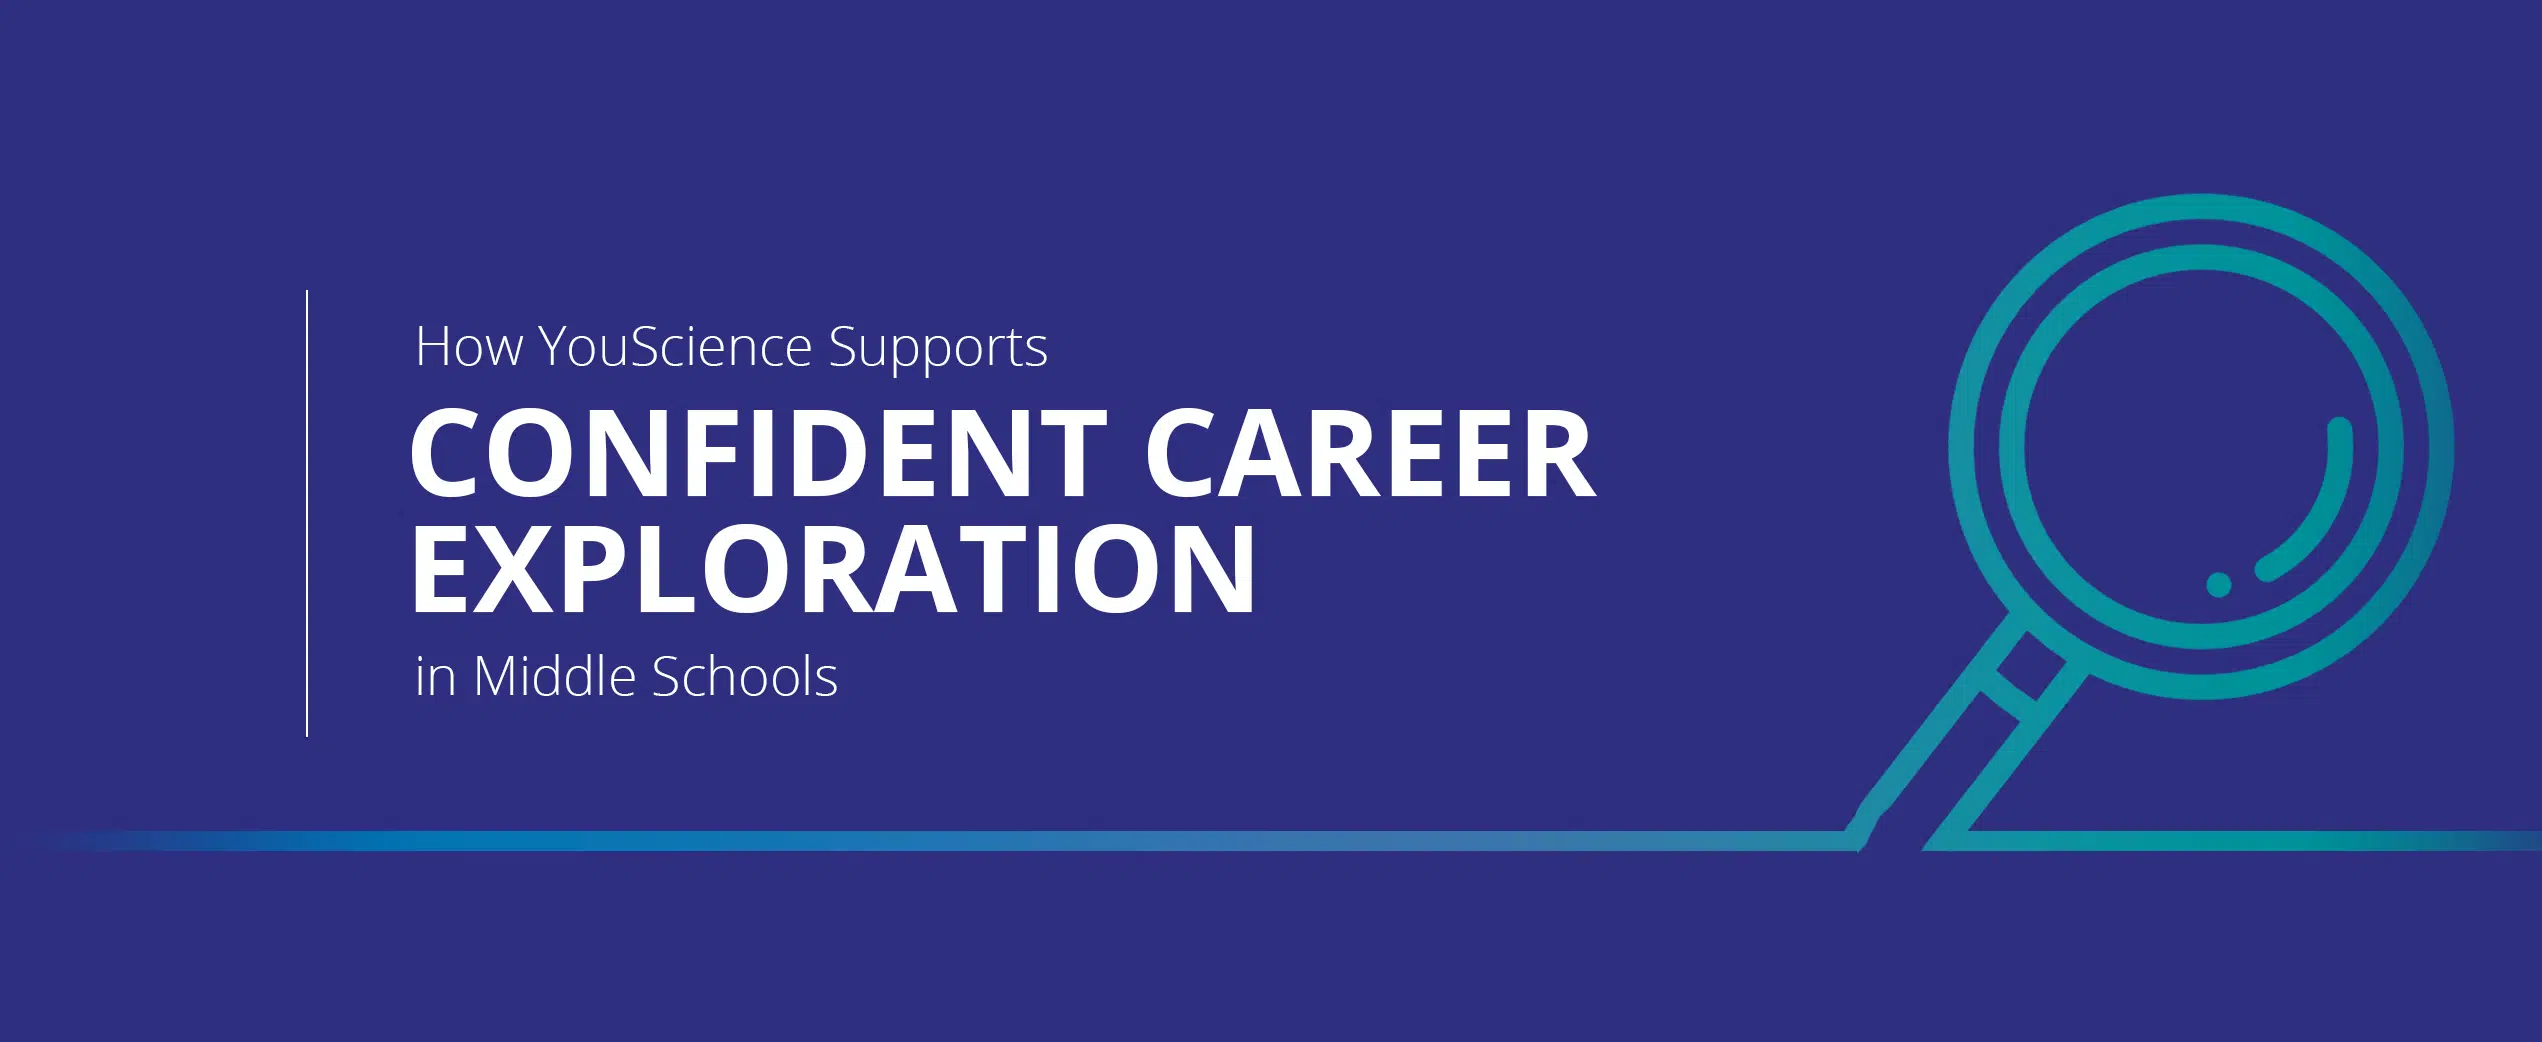 How YouScience Supports Confident Career Exploration in Middle School